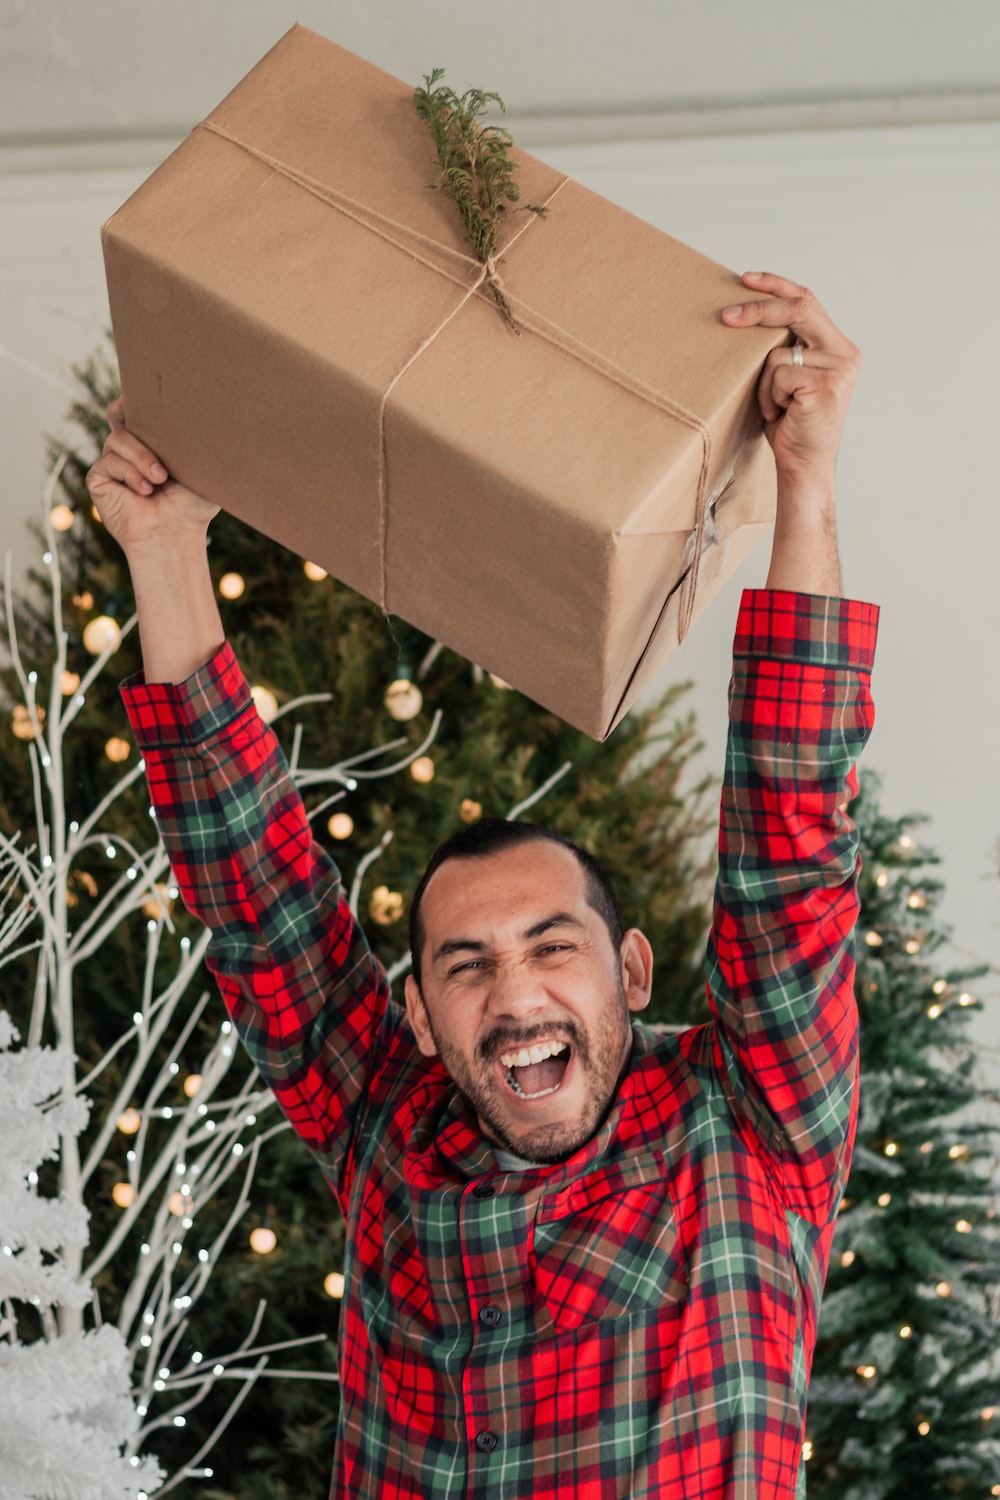 a man in a red and green plaid shirt holding a brown box over his head